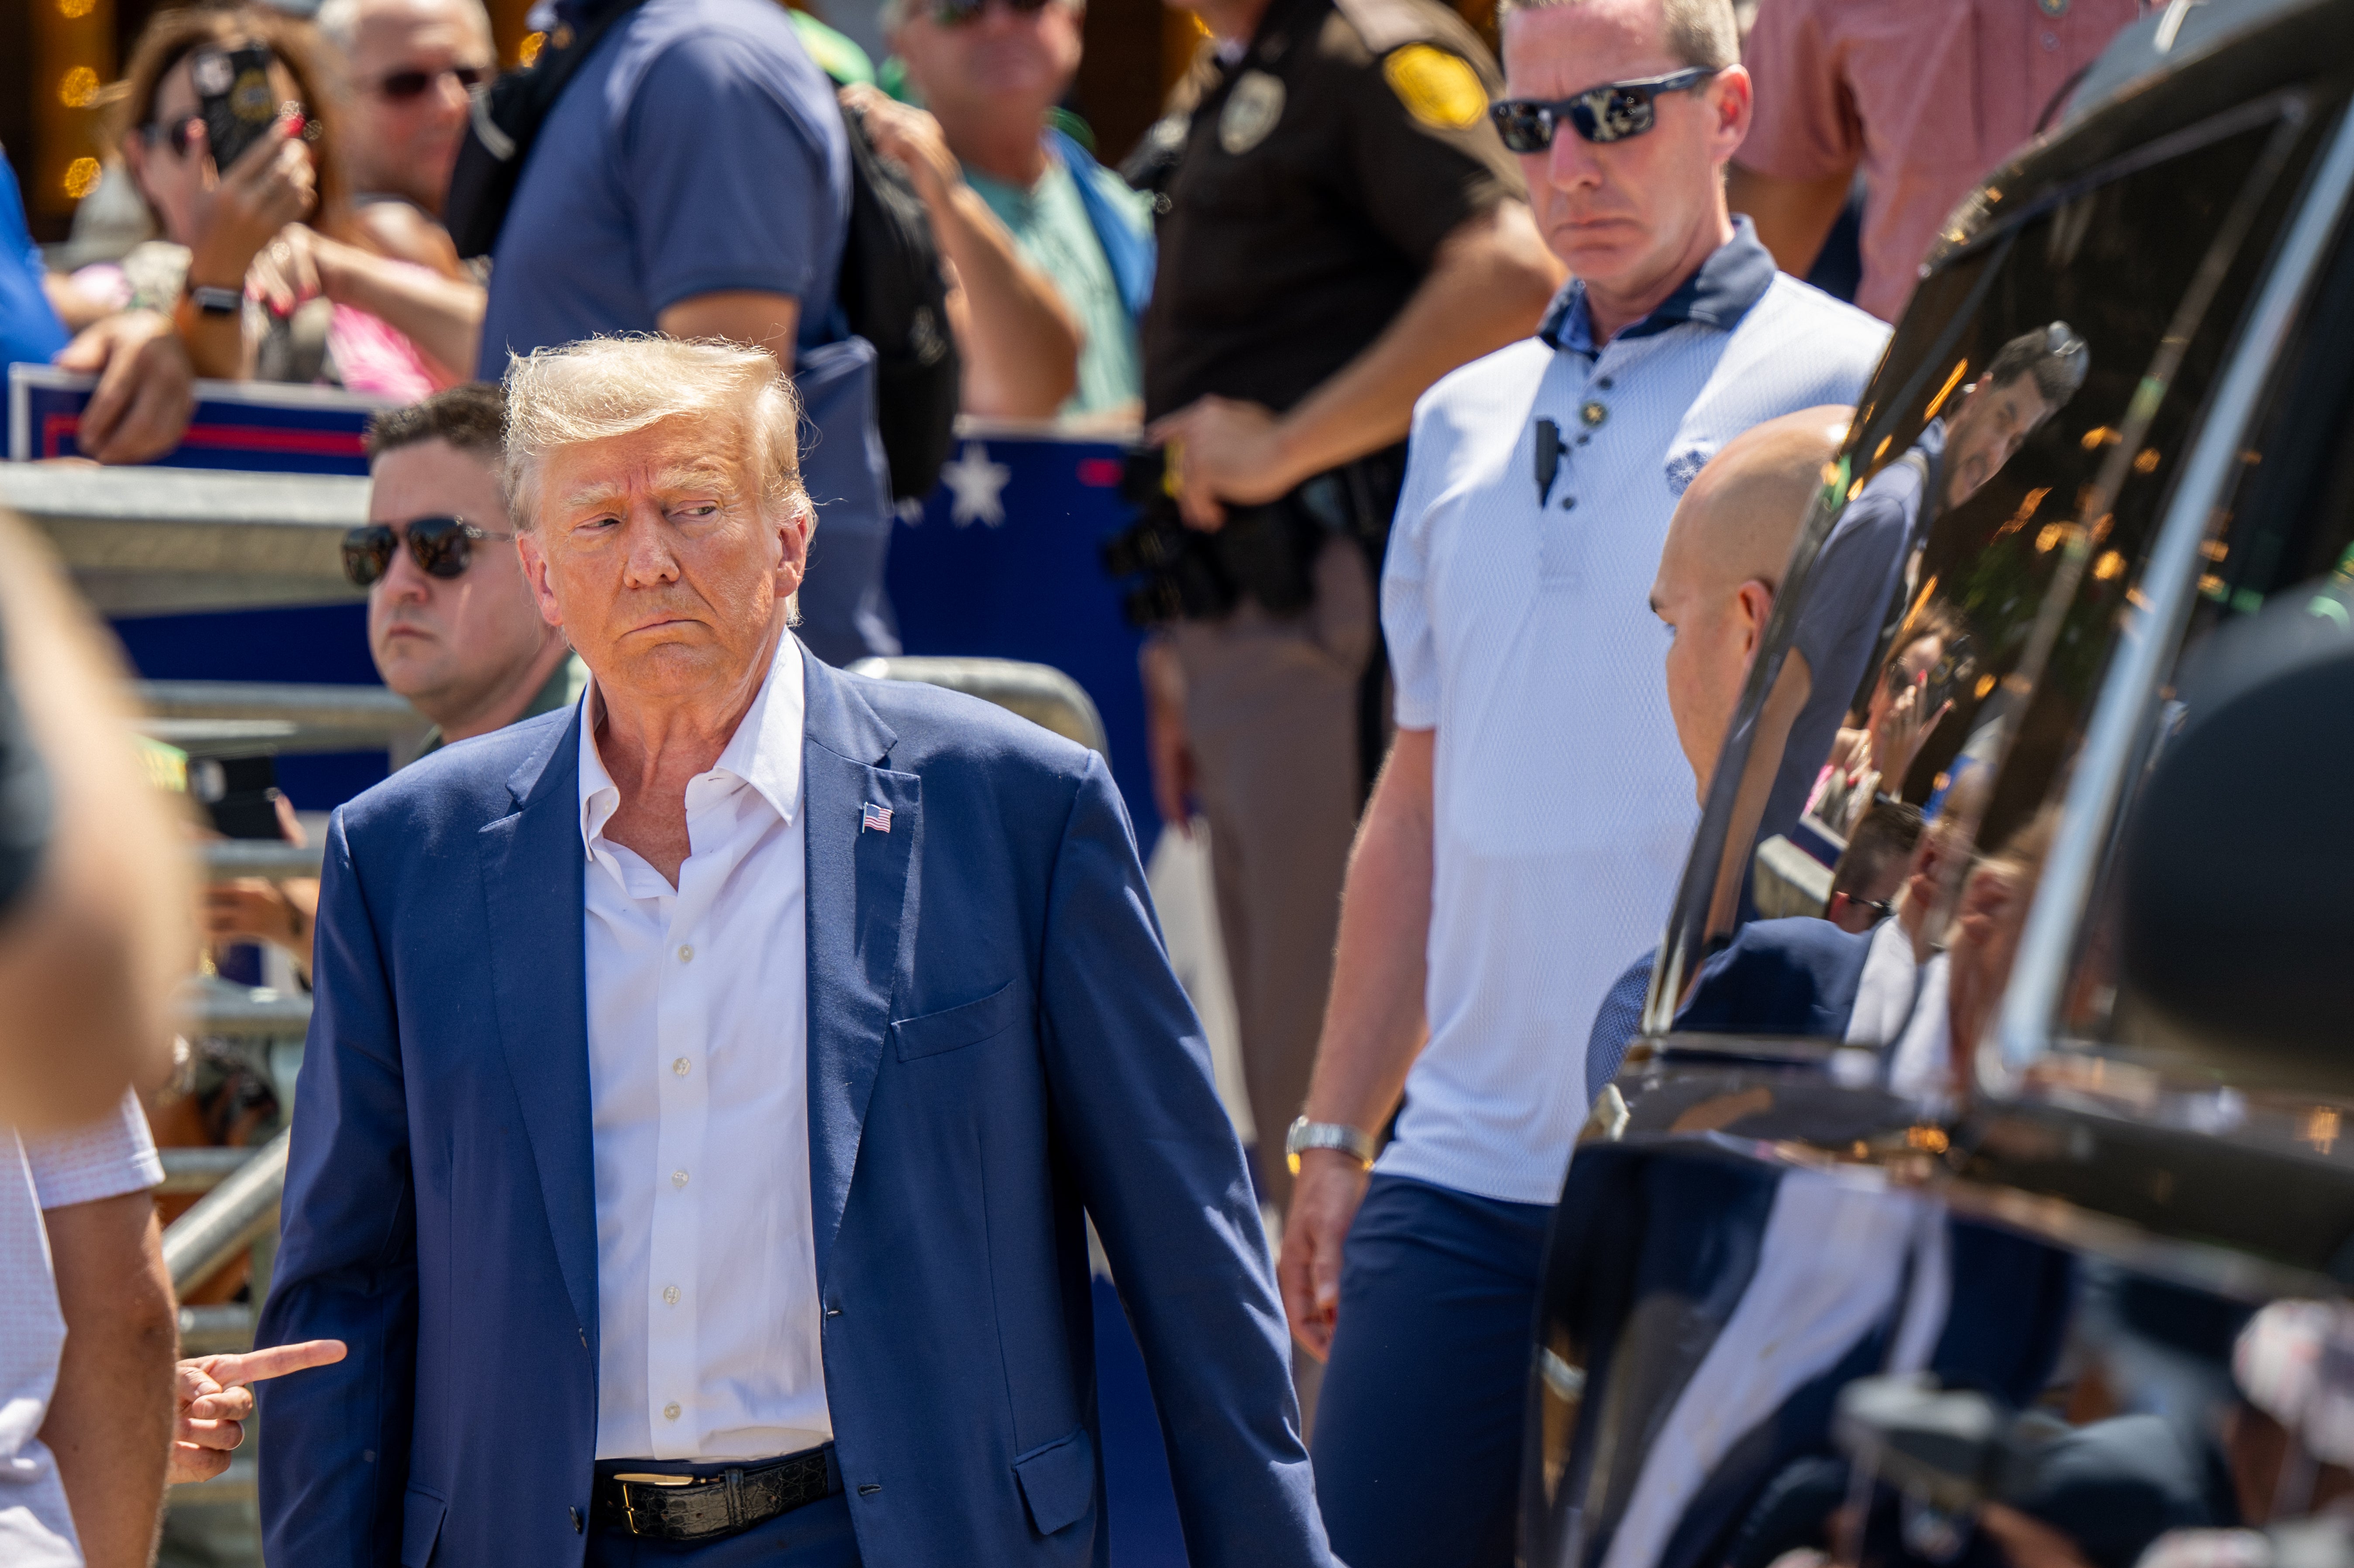 Donald Trump pictured after speaking at the Steer N' Stein bar at the Iowa State Fair on 12 August